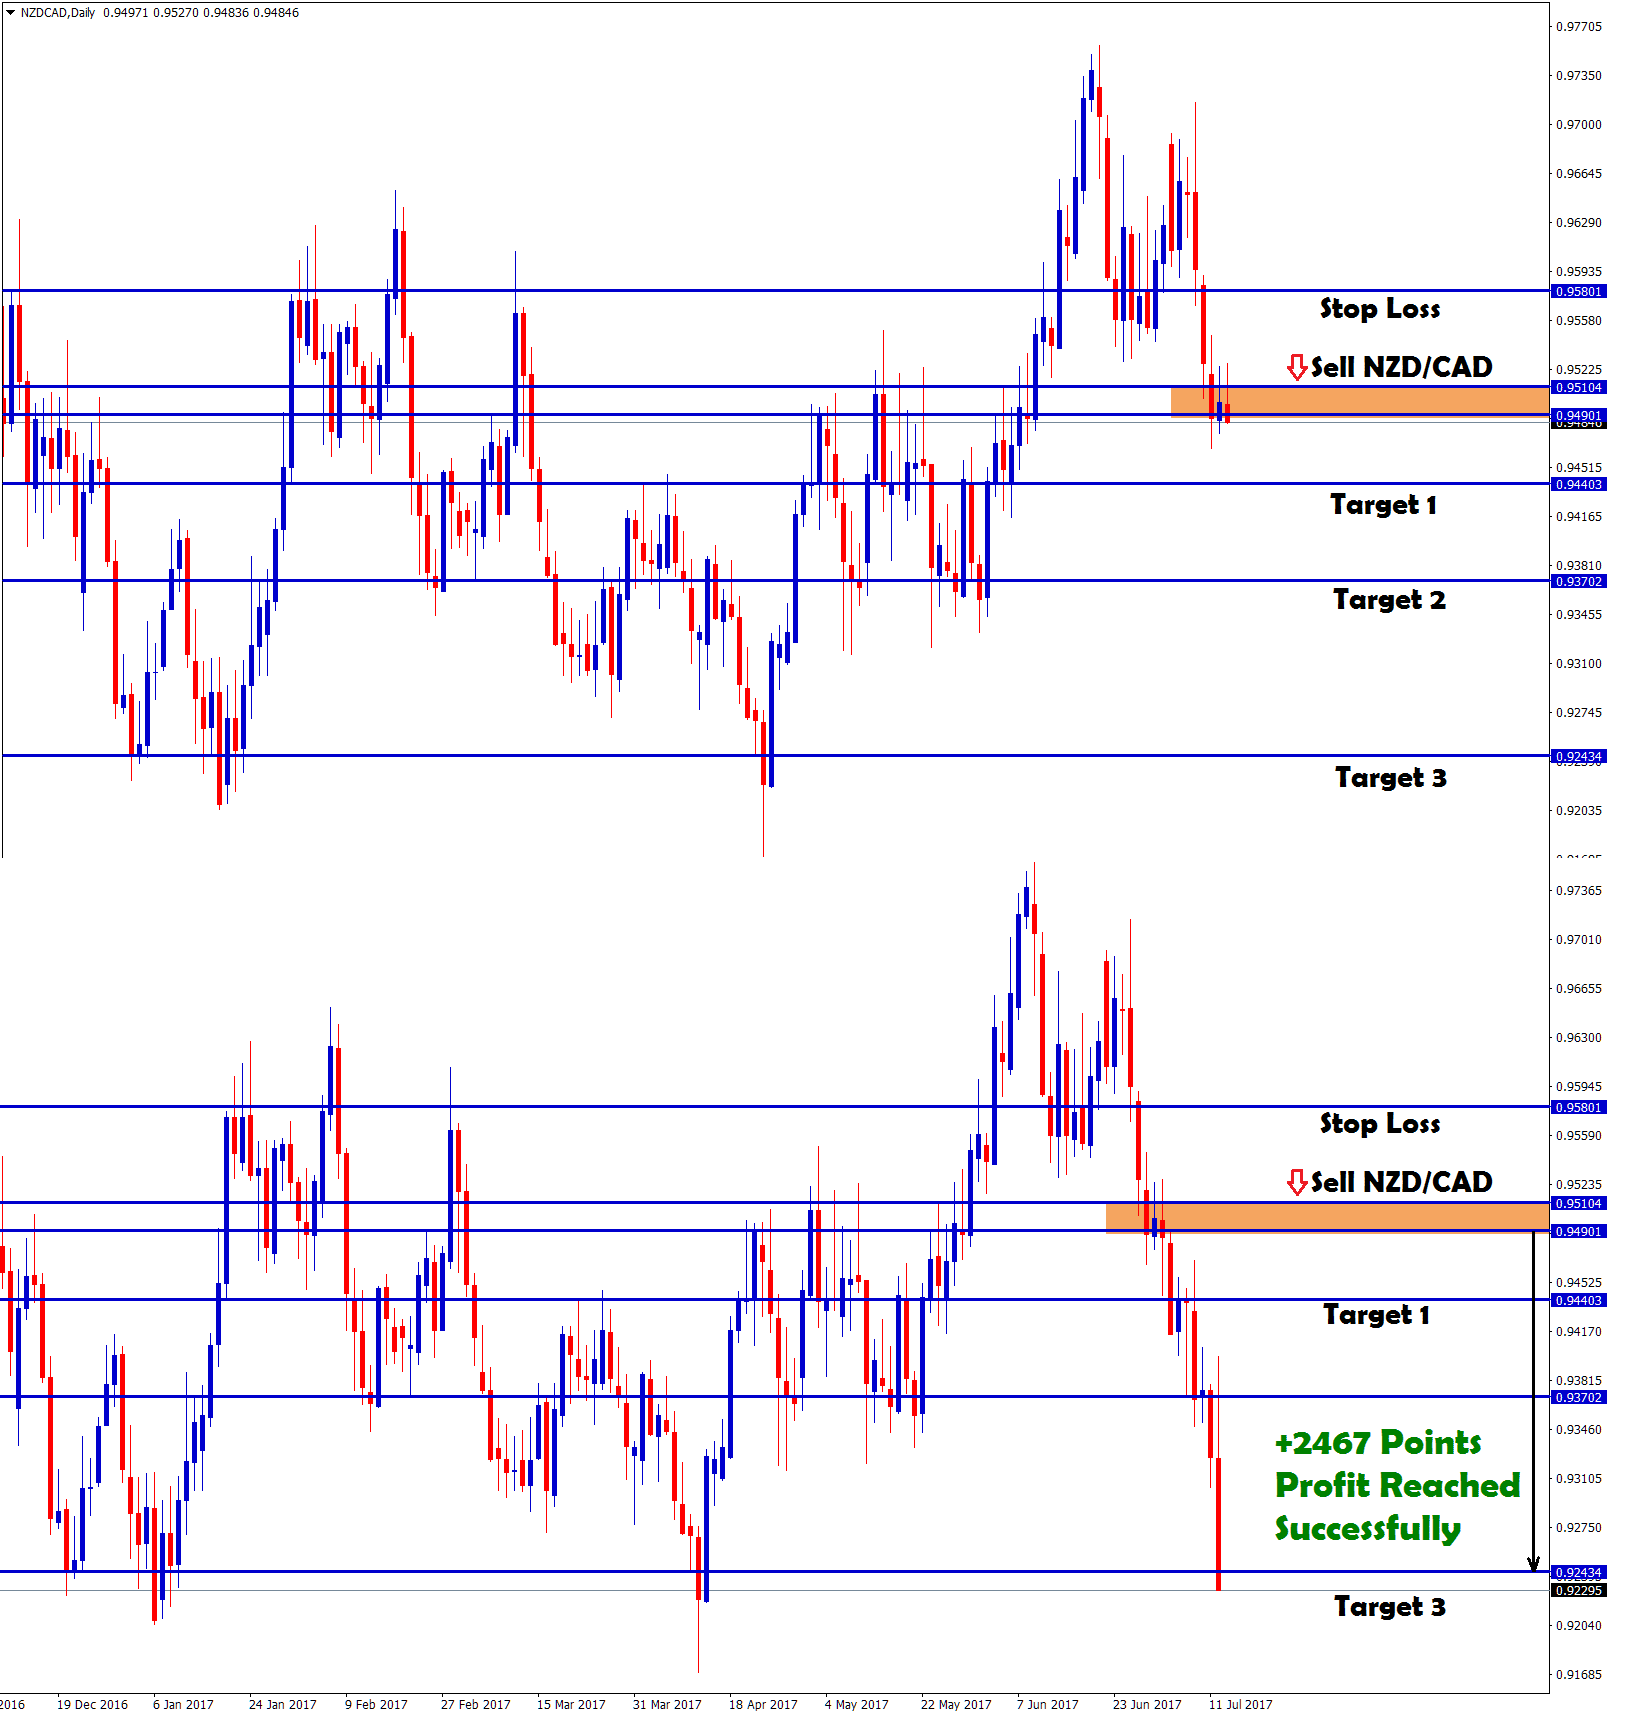 NZDCAD sell trading signal reached 2467 points profit